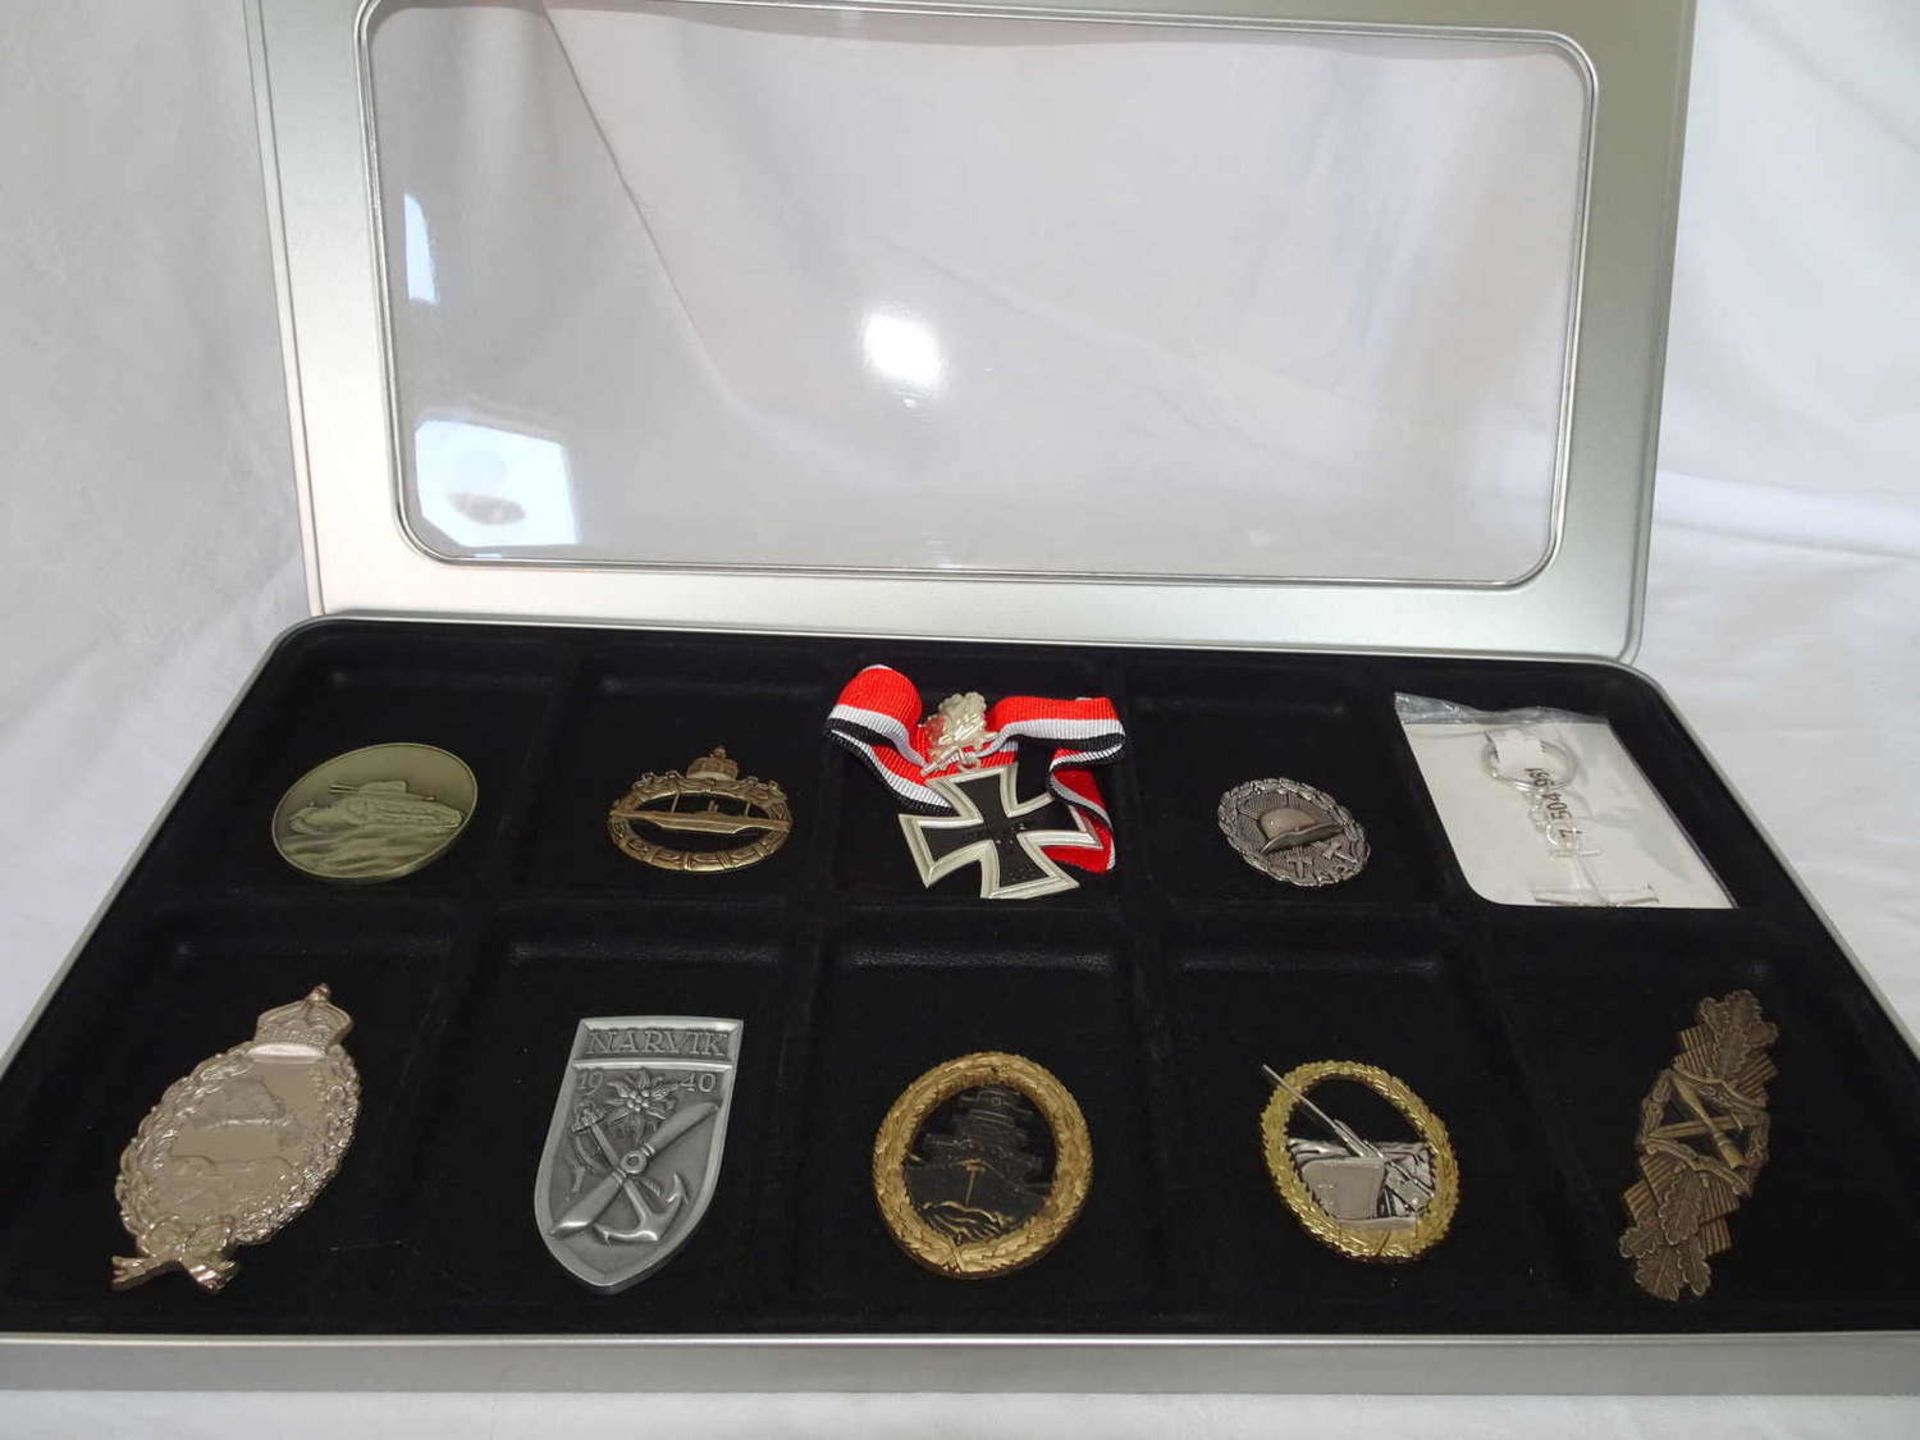 1 box of replica medals "The German Soldier", a total of 10 pieces.1 Kiste Replik Orden "Der